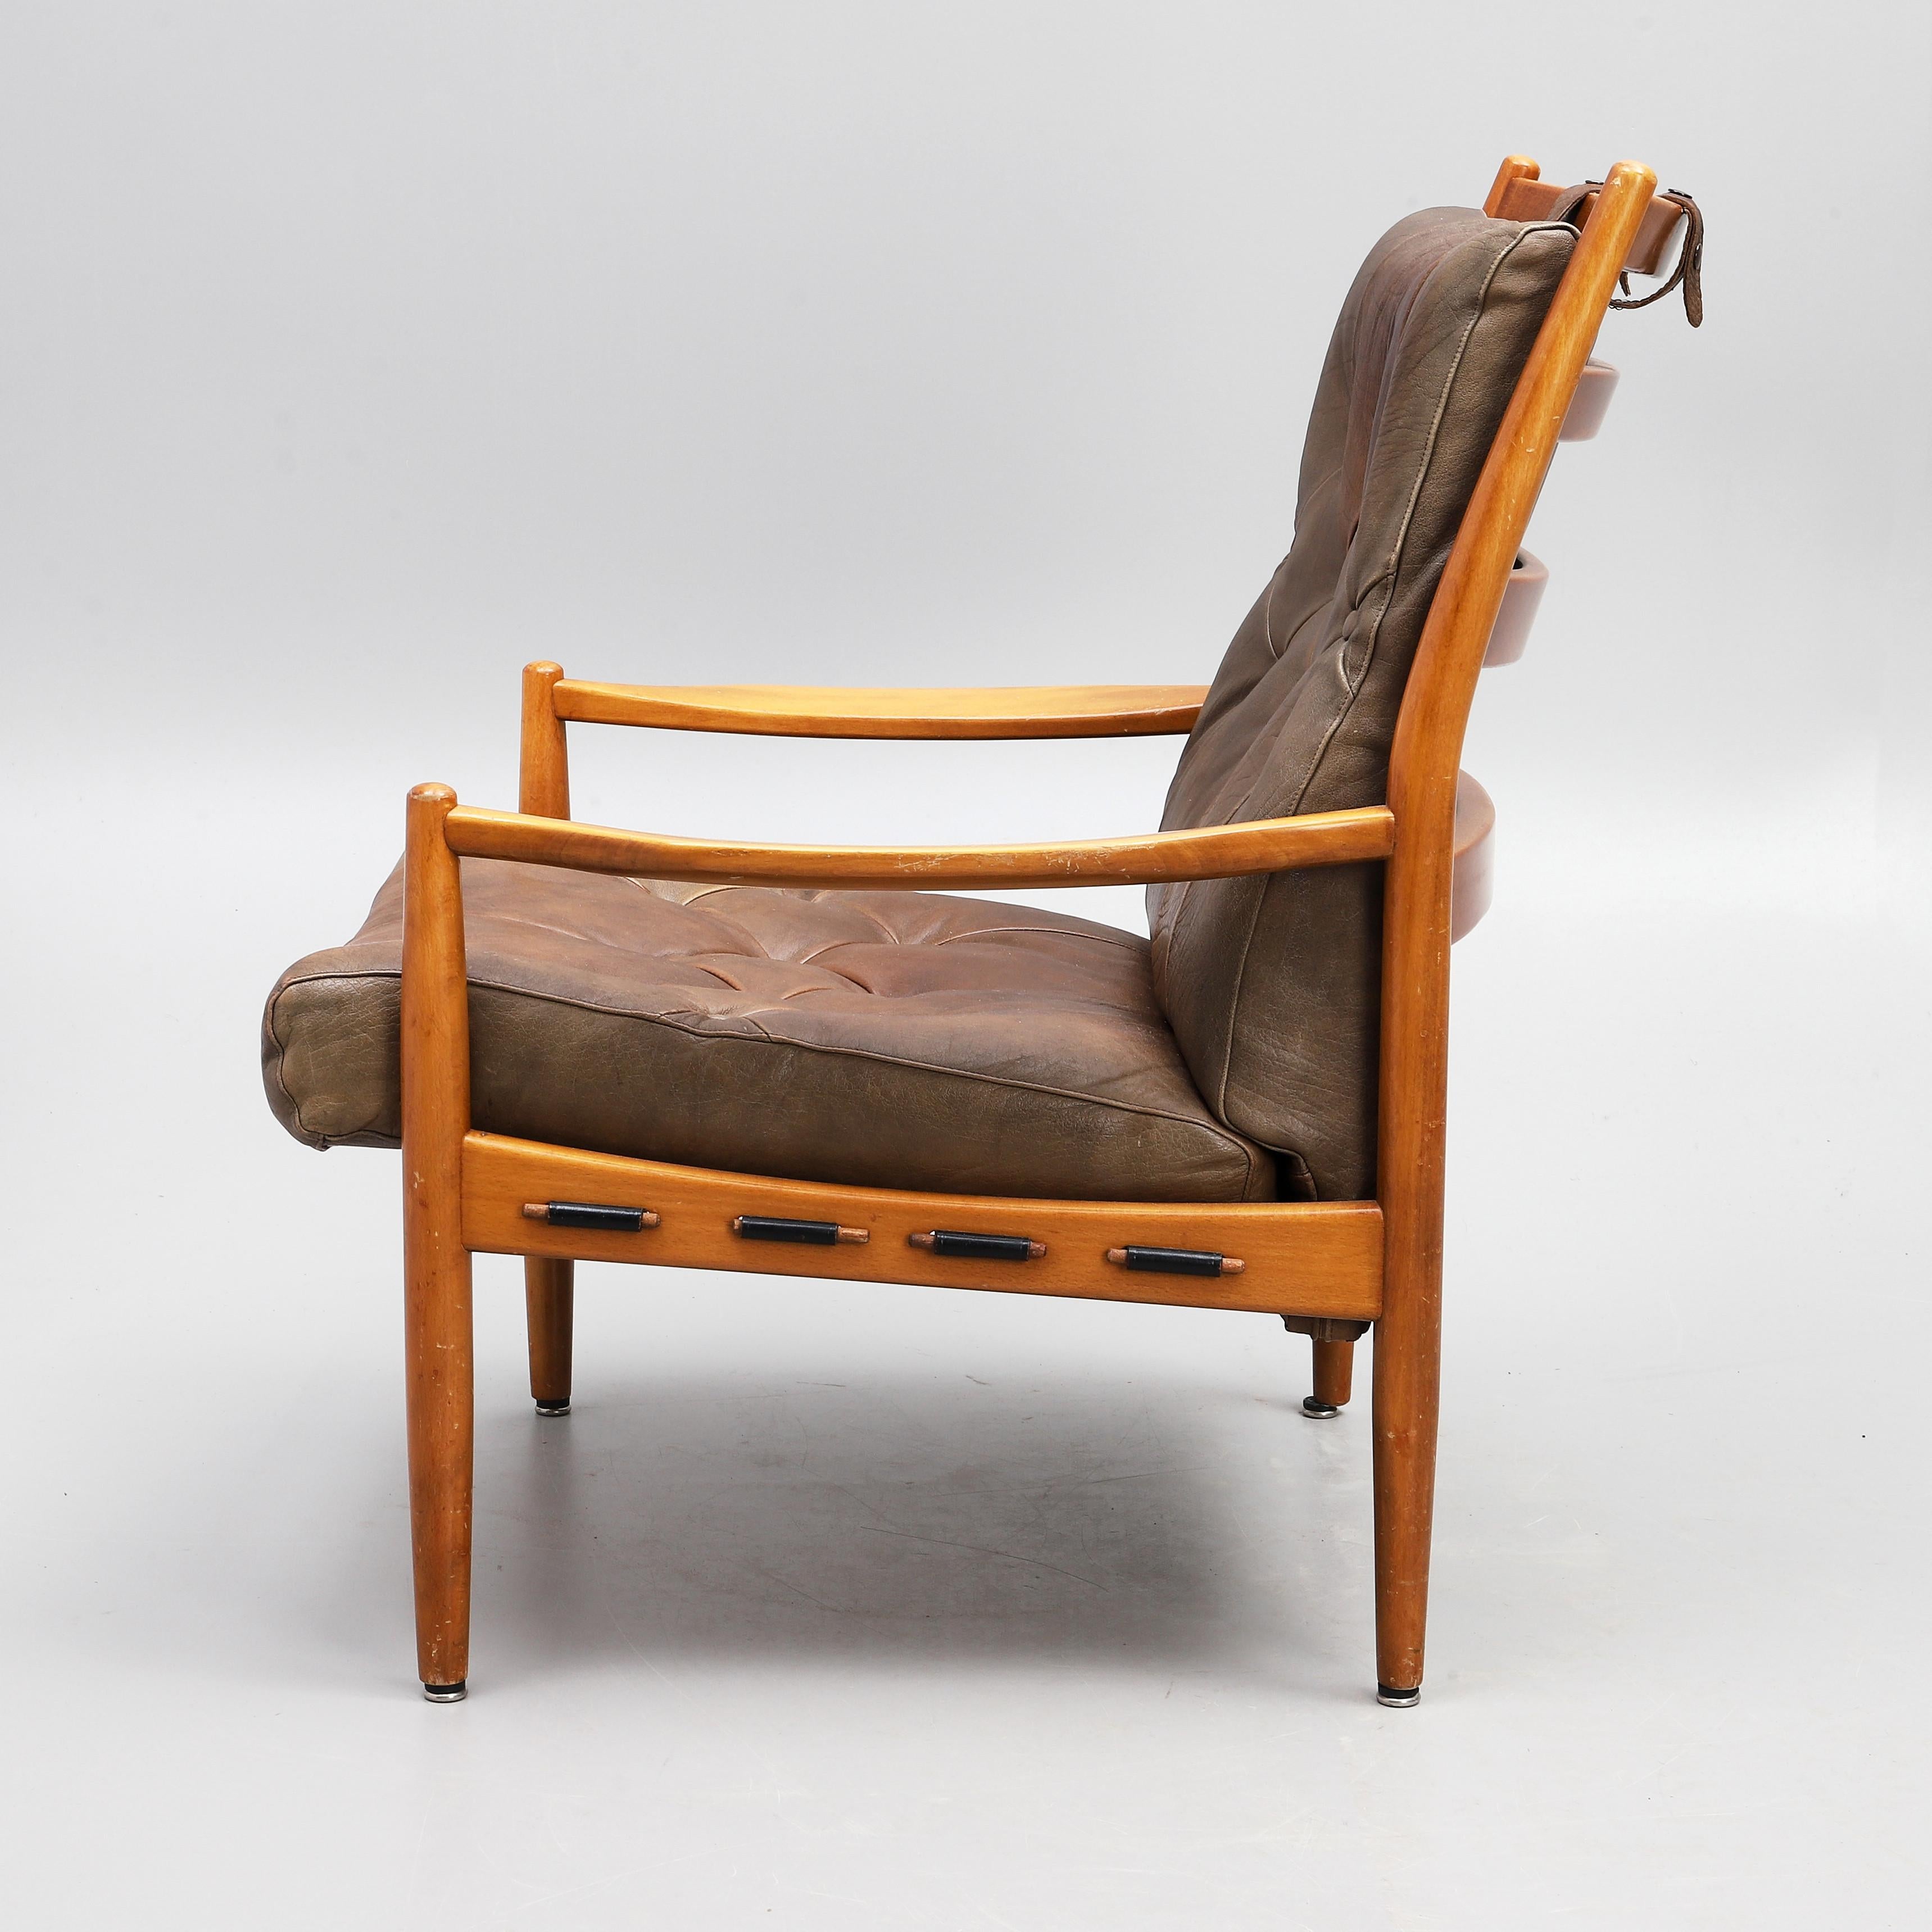 Swedish Ingemar Thillmark Lacko Armchair for OPE Mobler, Sweden, 1960 For Sale